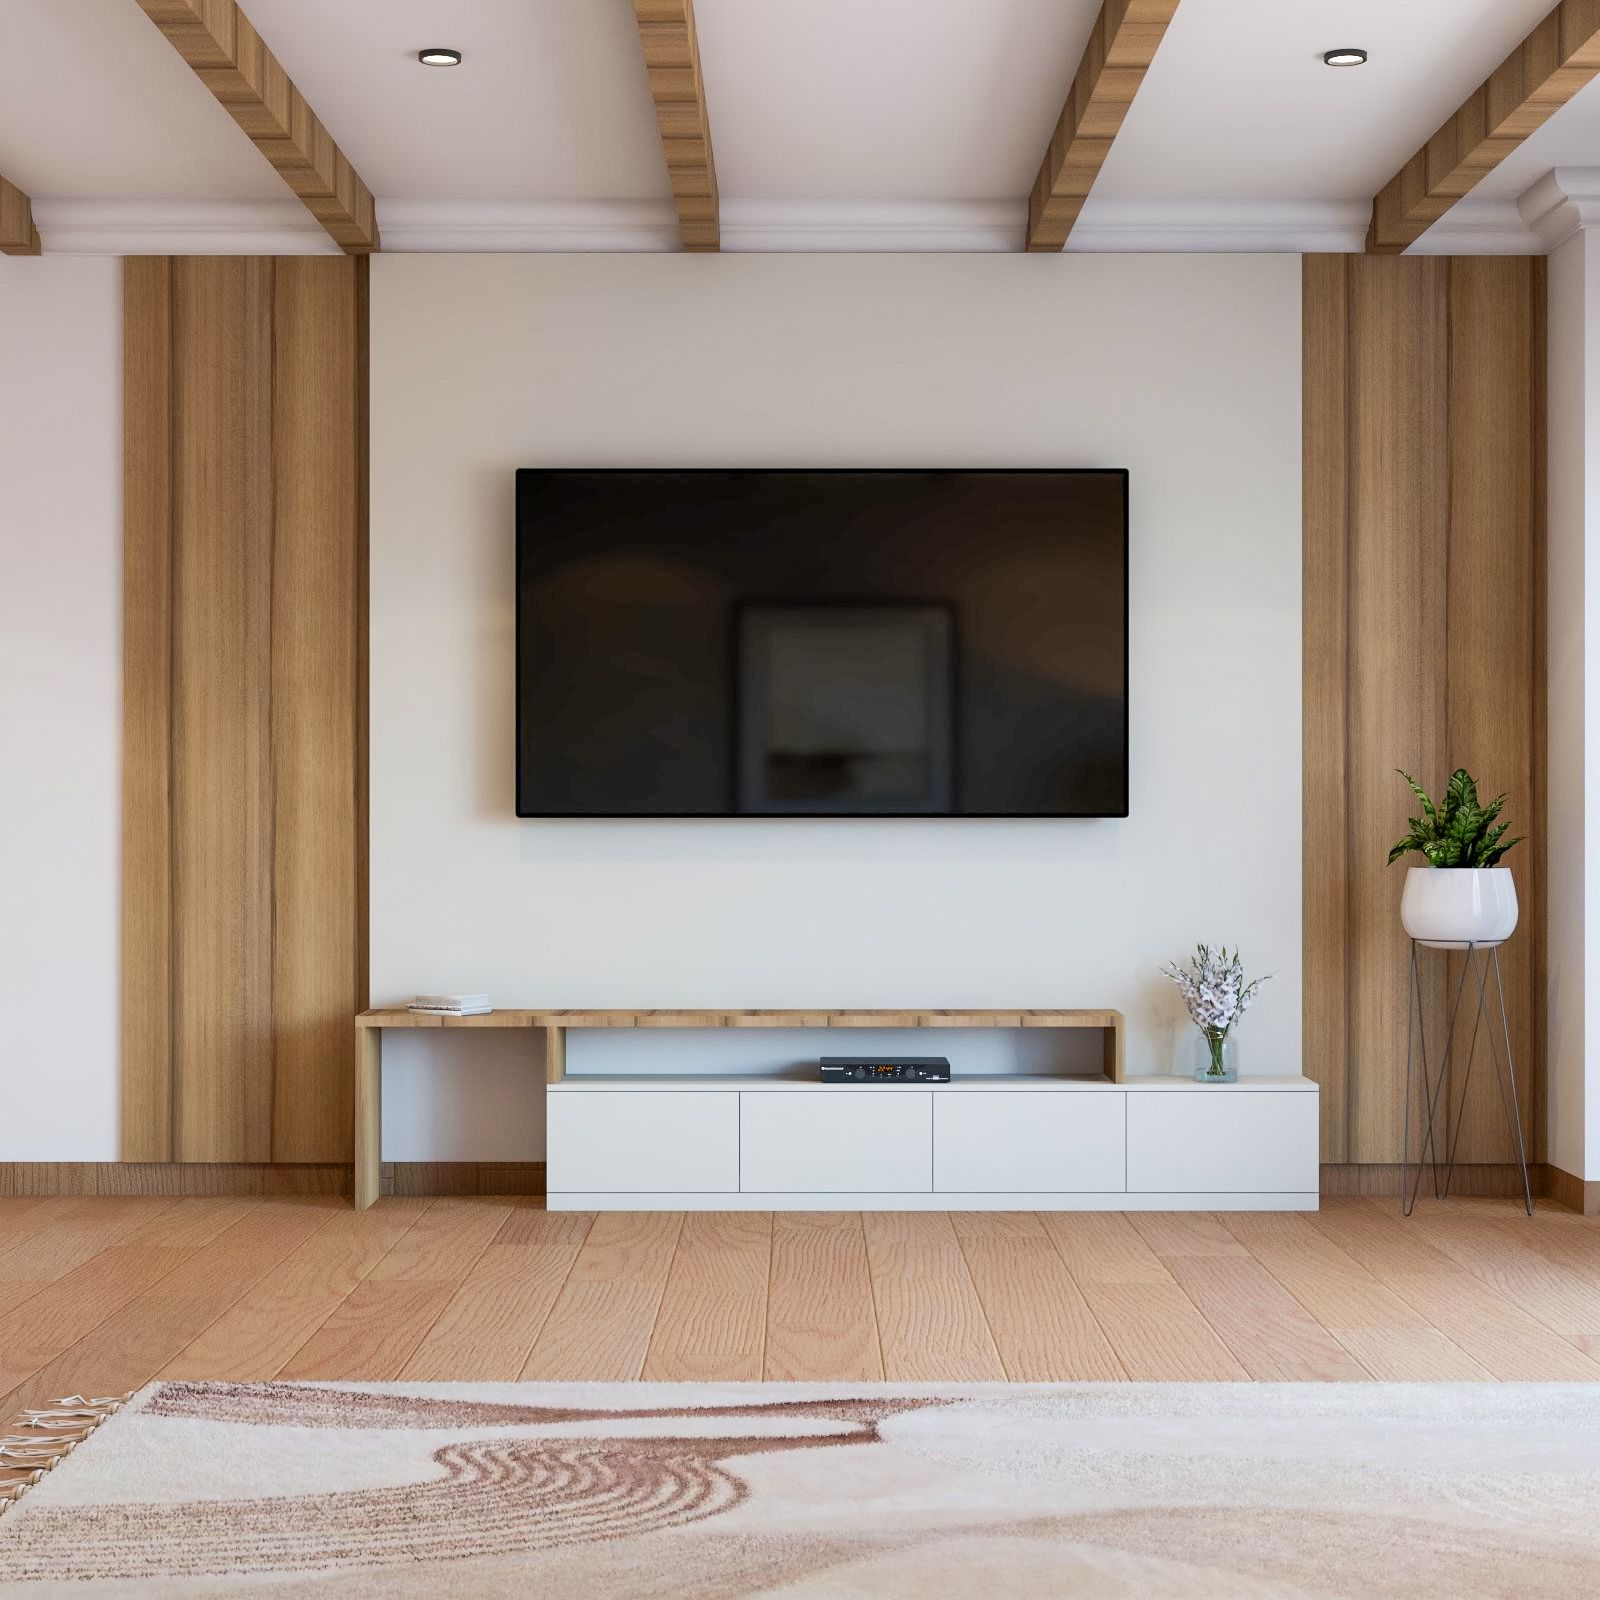 Scandinavian TV Unit Design With Wooden Floor-Mounted TV Console And Wooden Side Panels